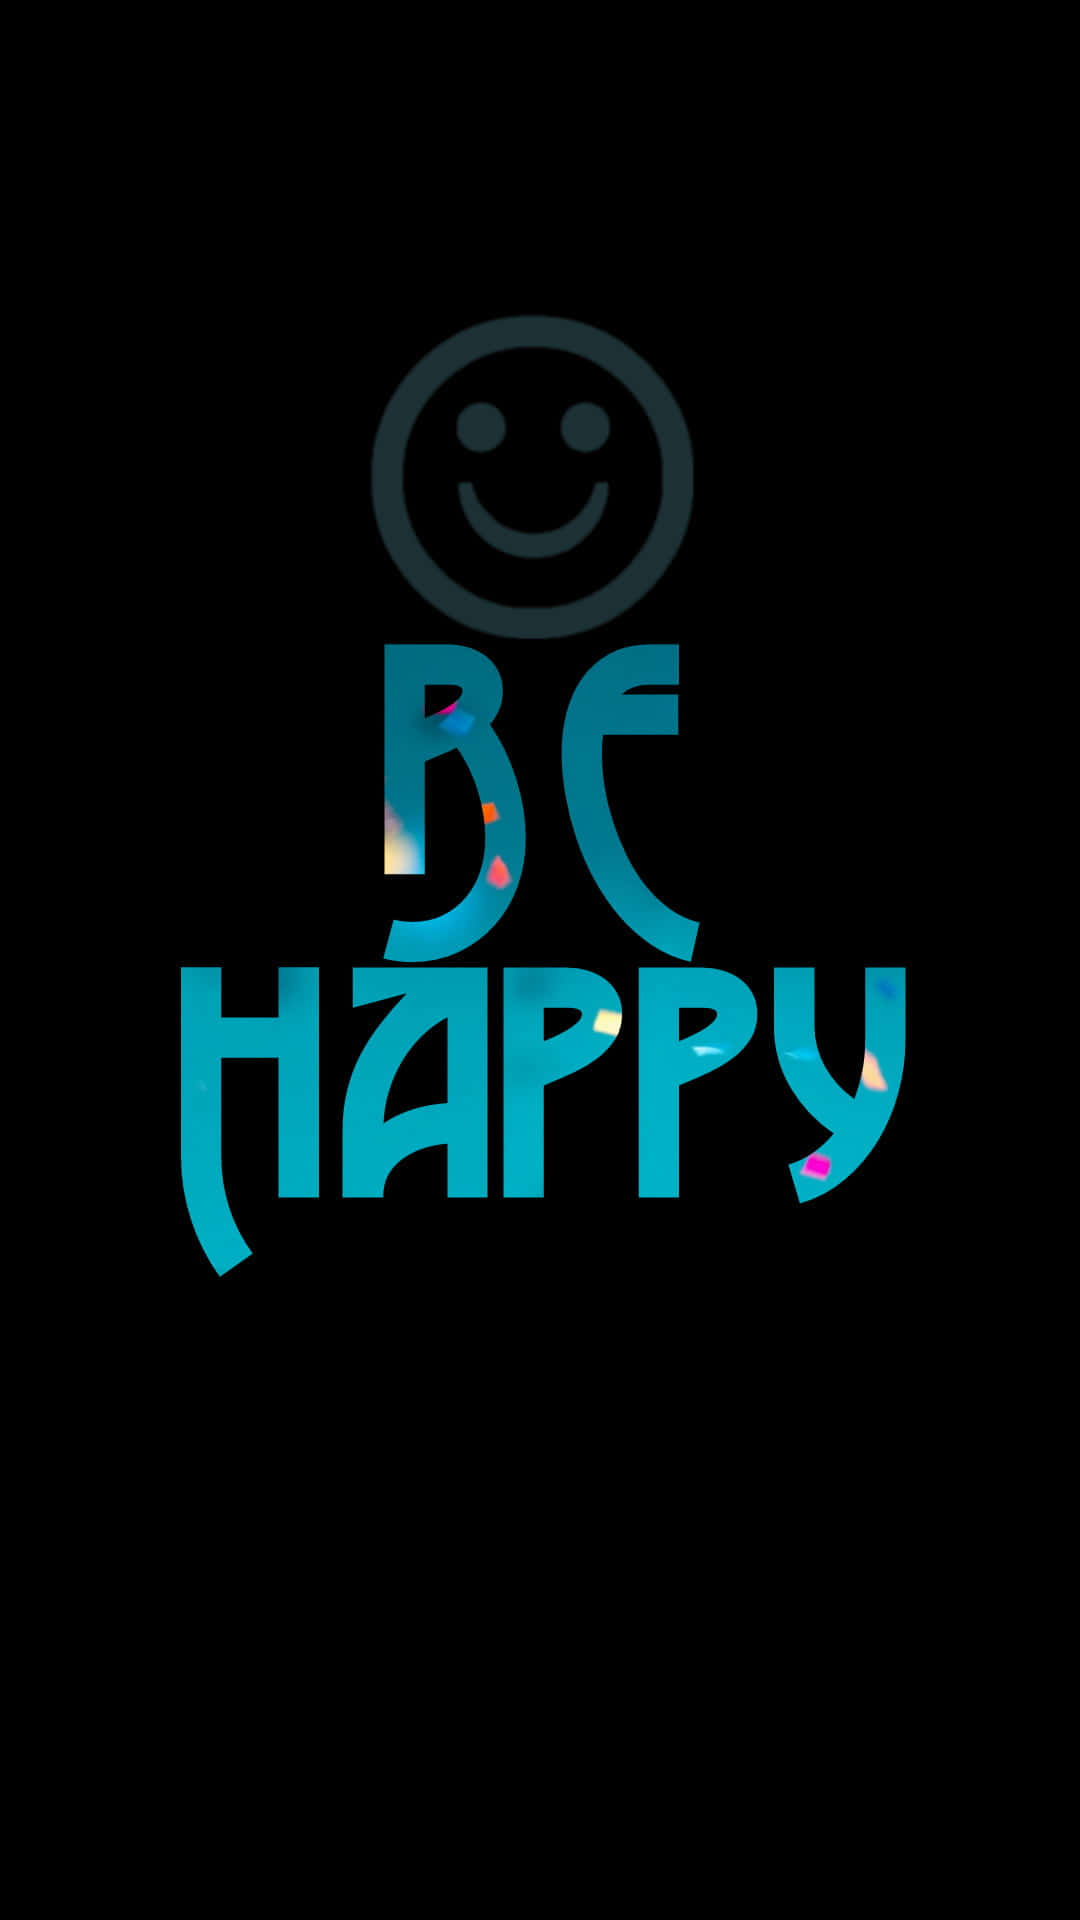 Stay connected with the HappyPhone Wallpaper